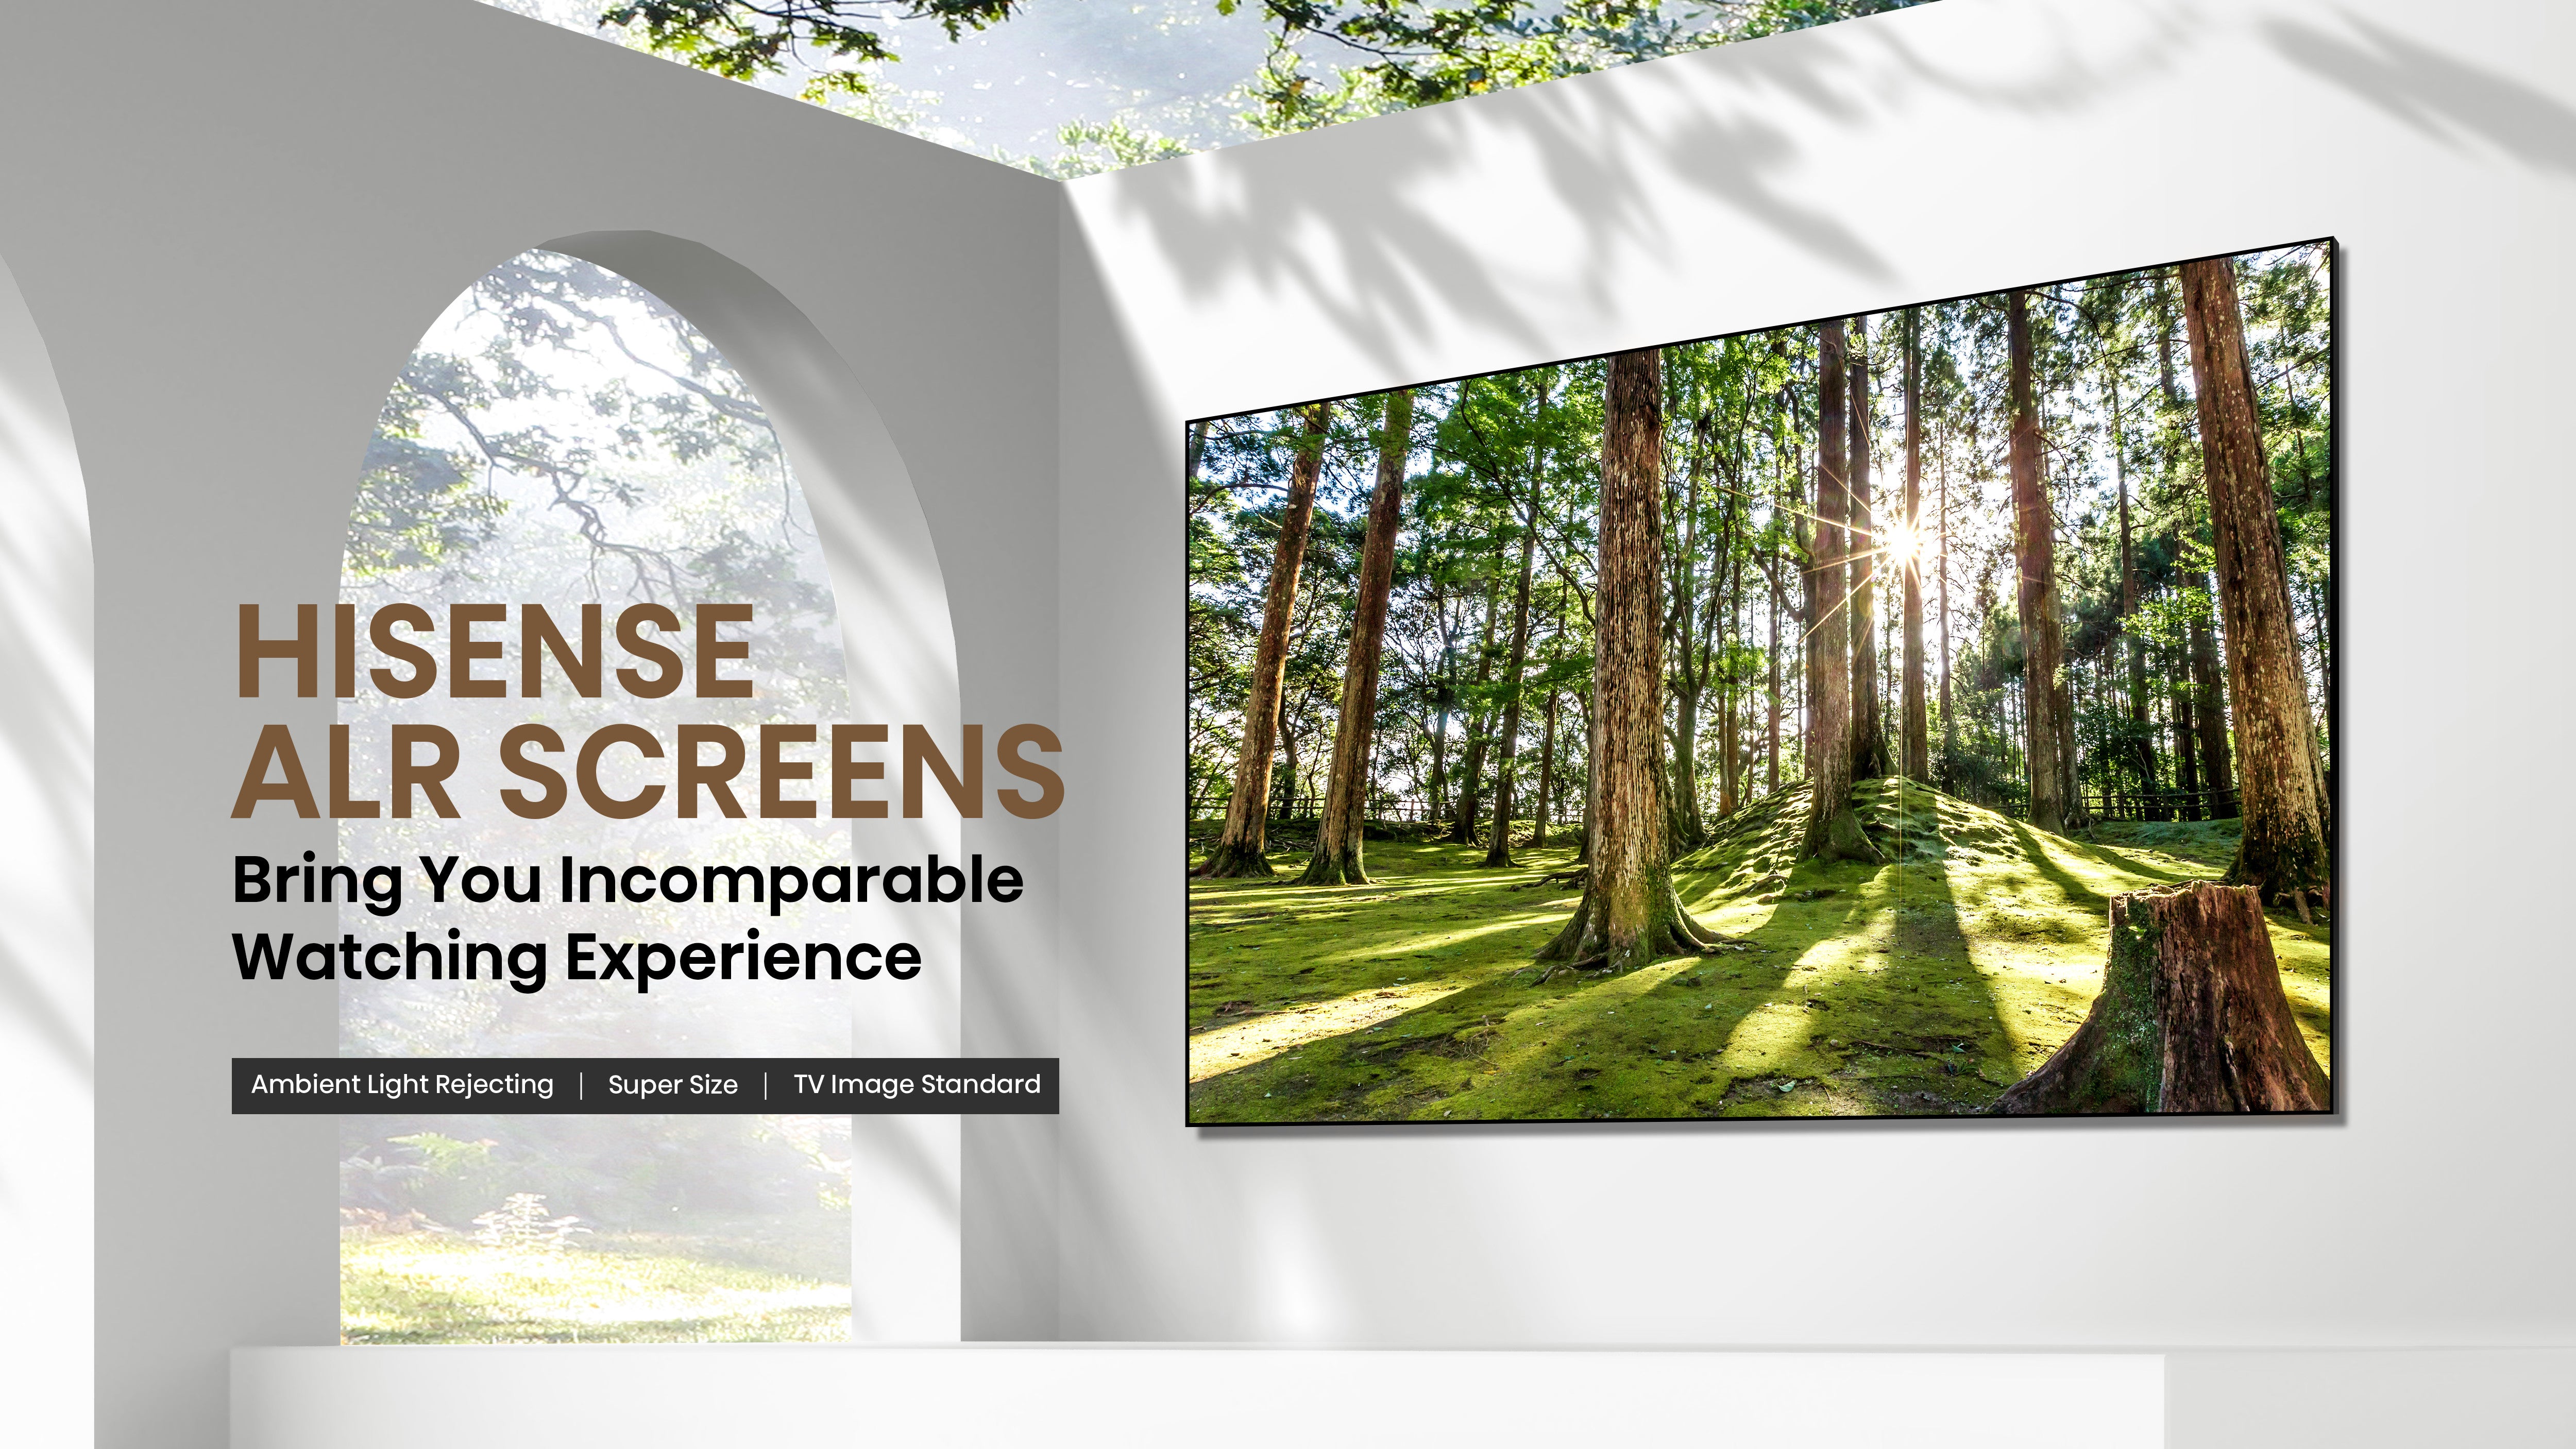 Hisense 100-inch Ambient Light Rejecting Fixed Wall Mount Ultra Short Throw Projector Screen - Black